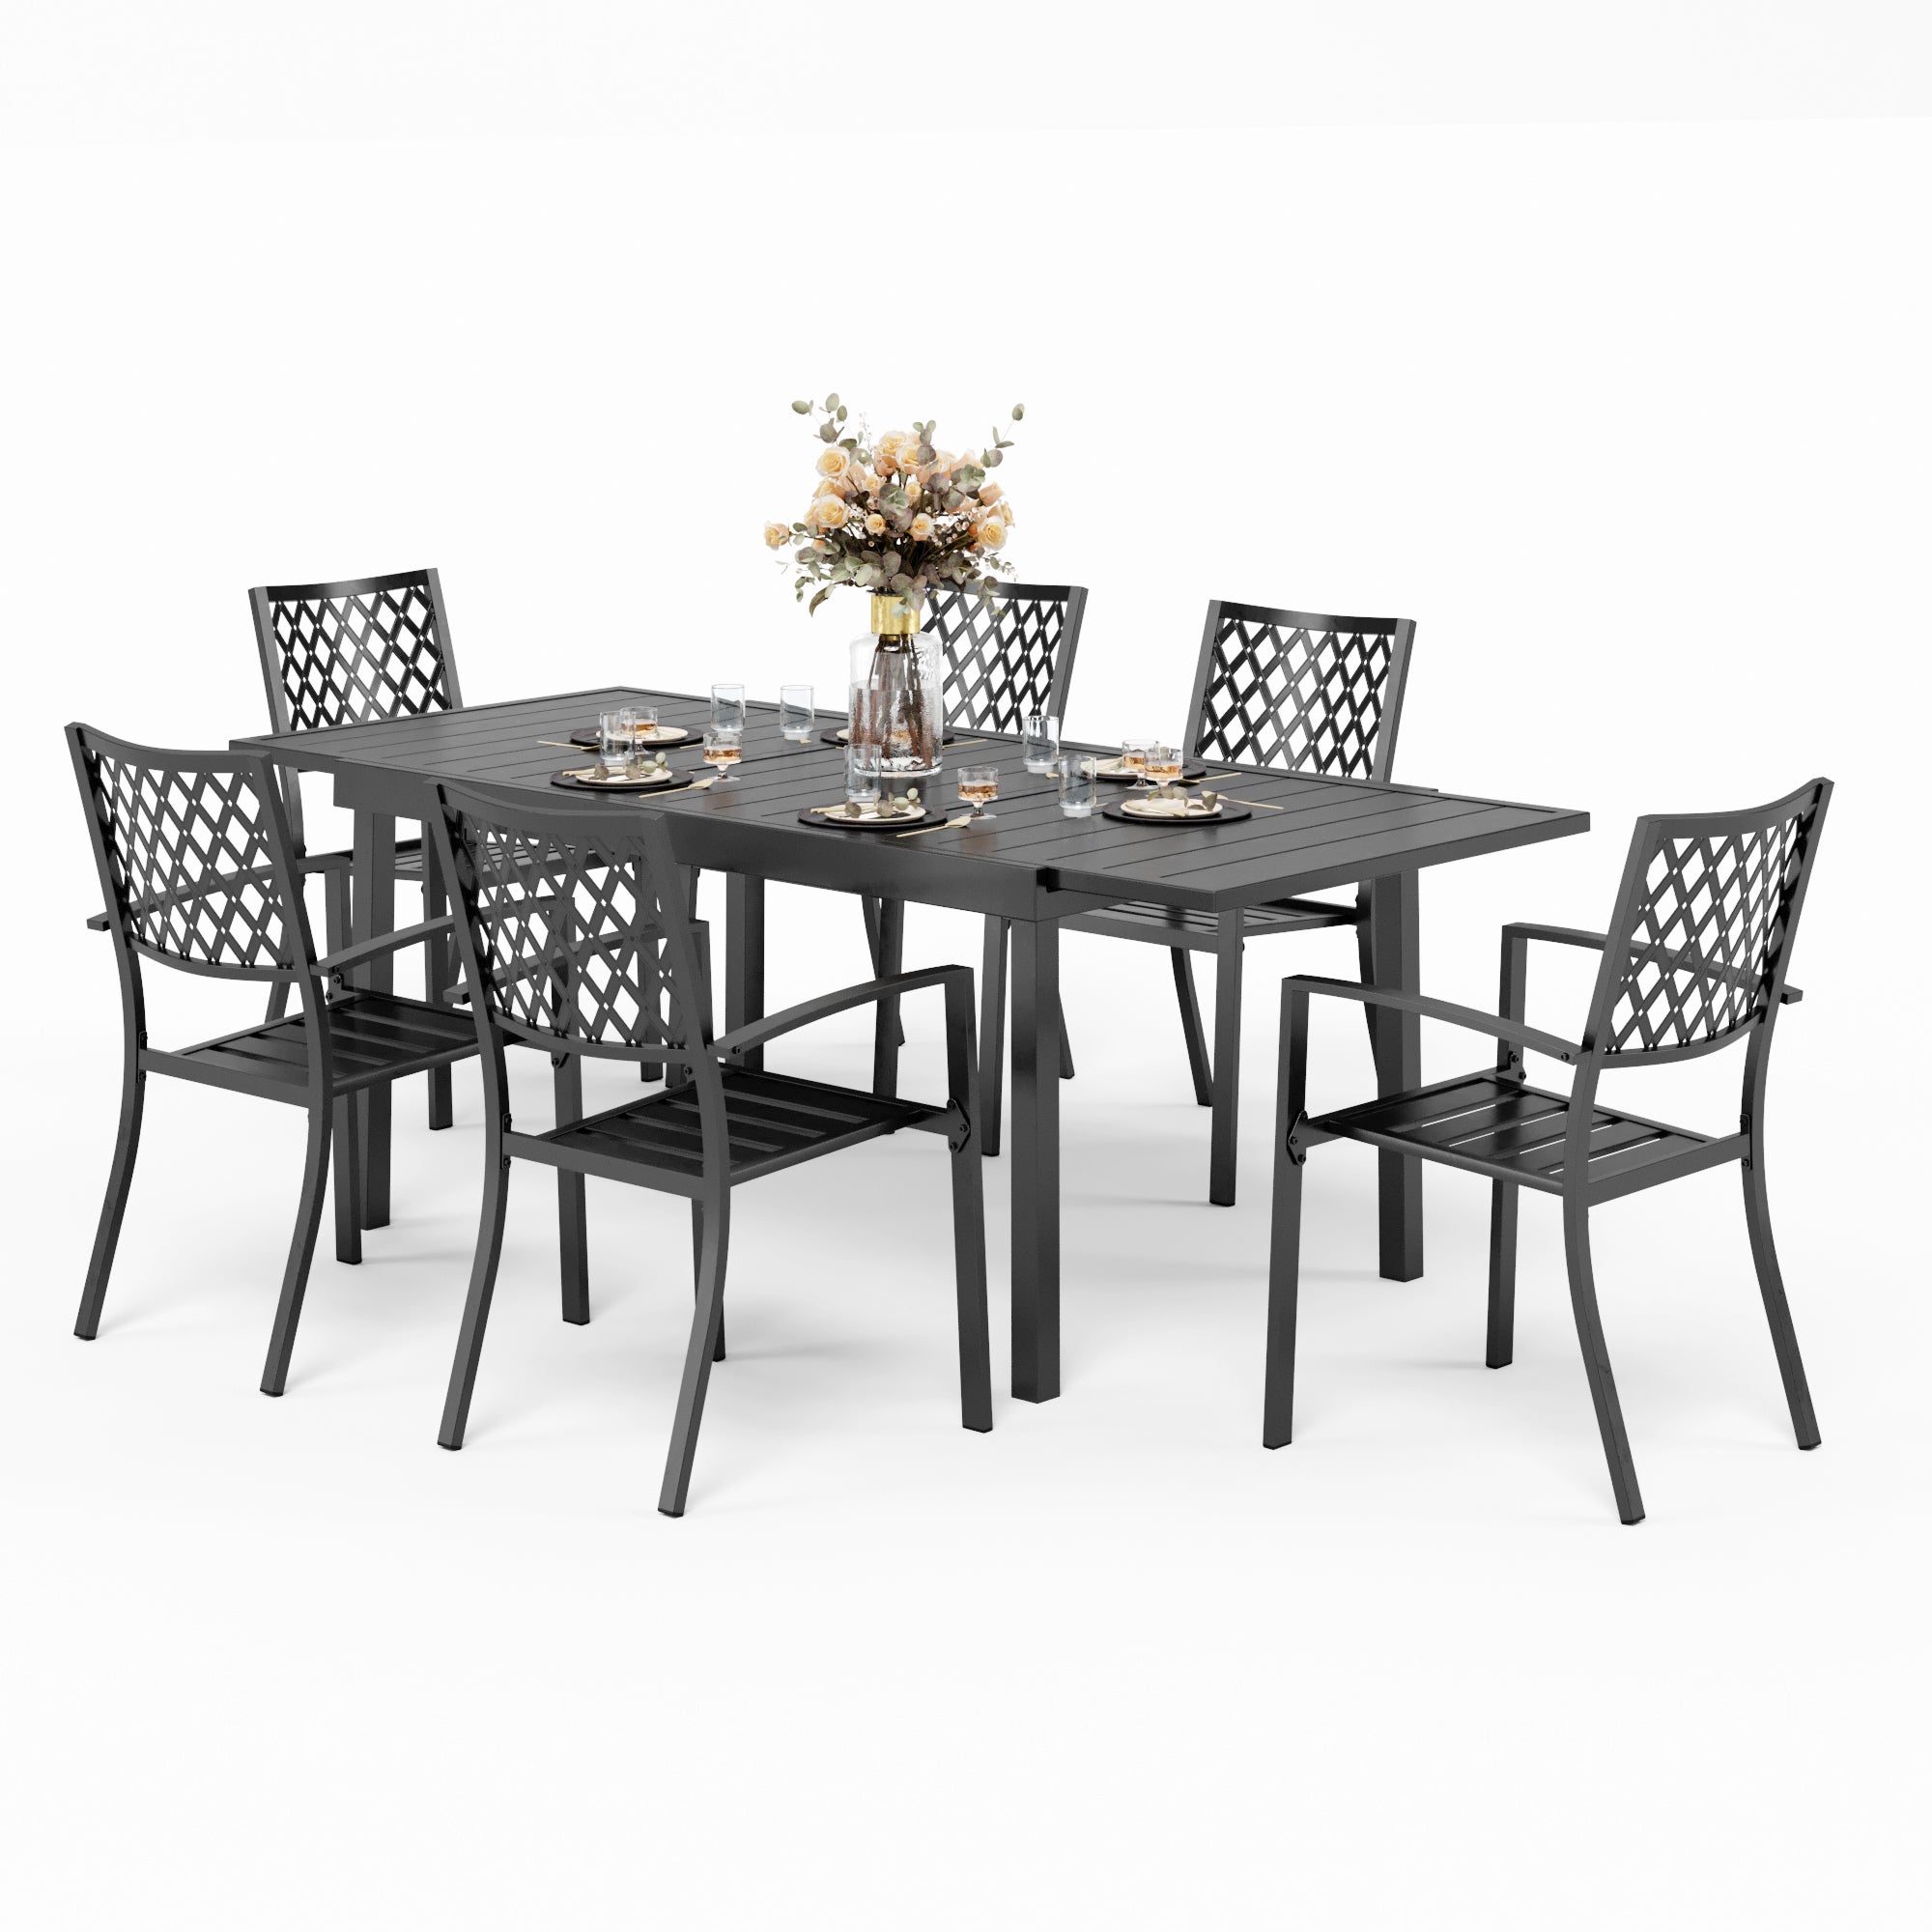 PHI VILLA Adjustable Steel Table and Stackable Chairs Metal Outdoor Patio Dining Sets